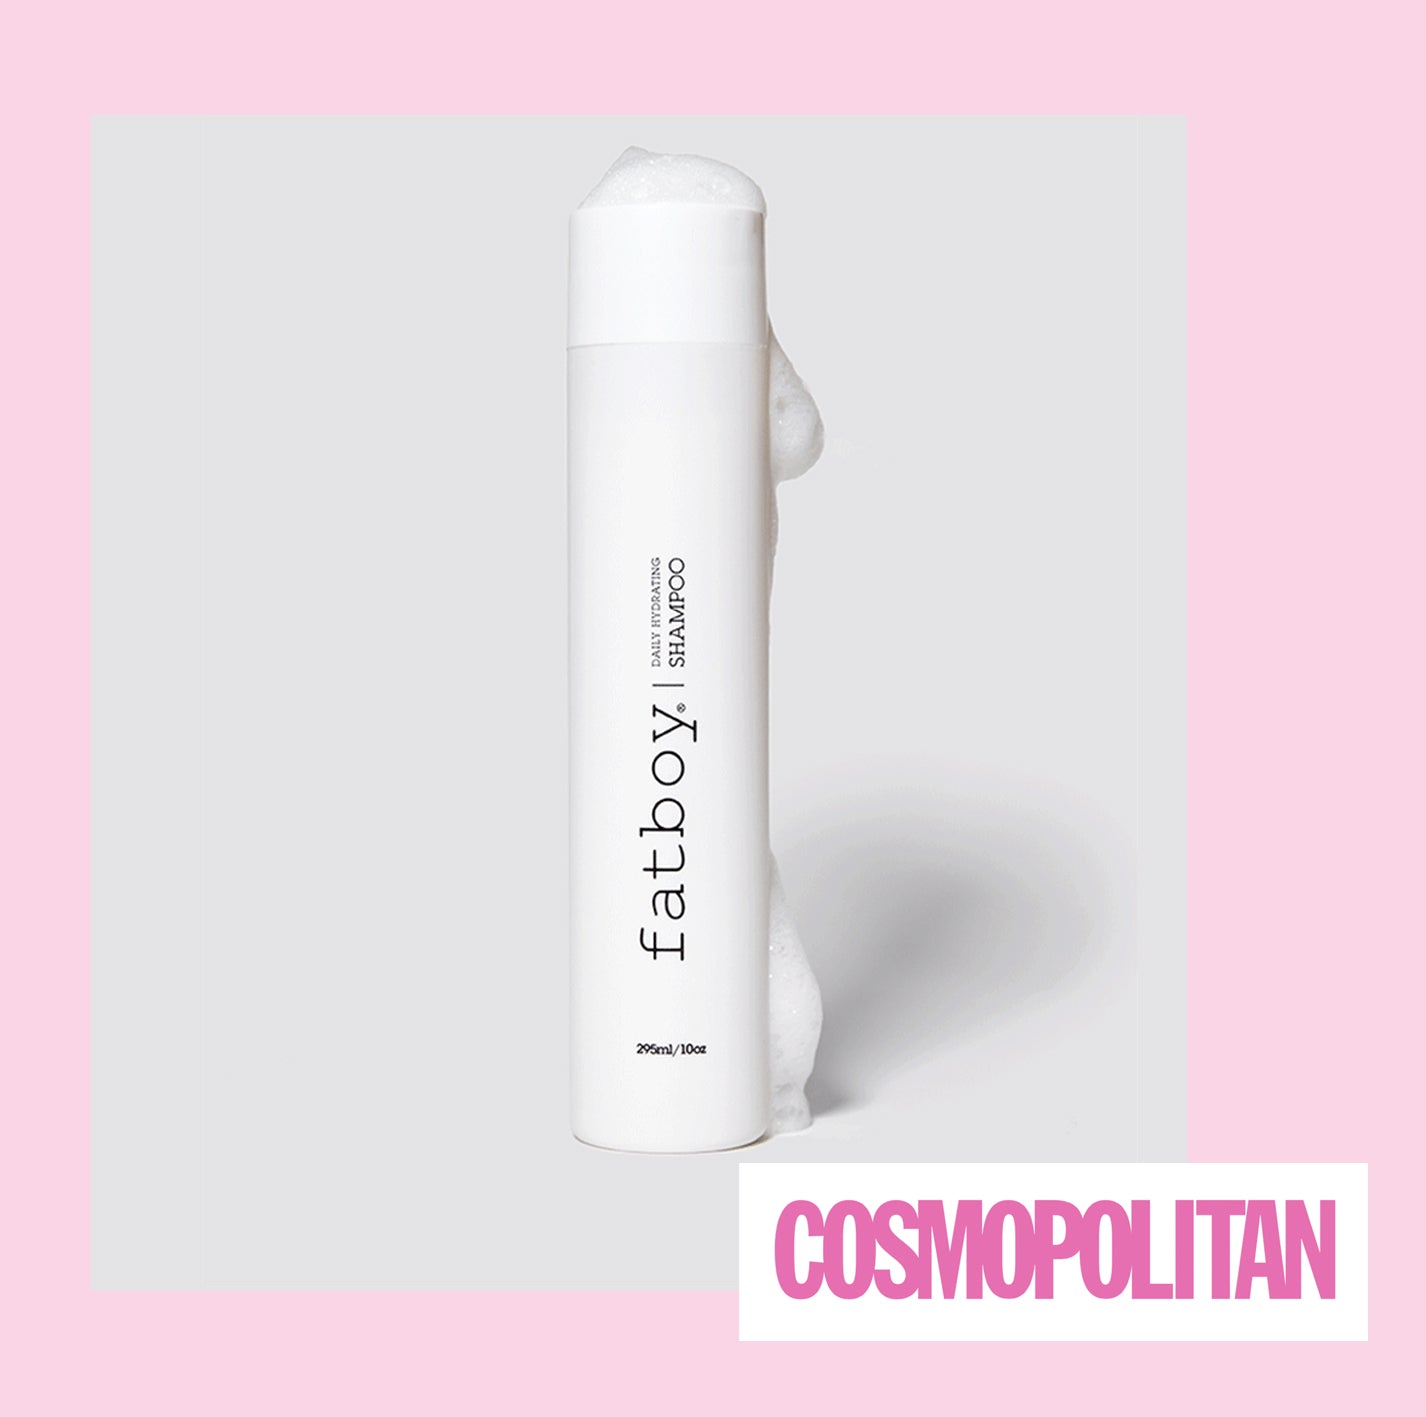 Cosmopolitan loves our Sulphate Free Daily Hydrating Shampoo!